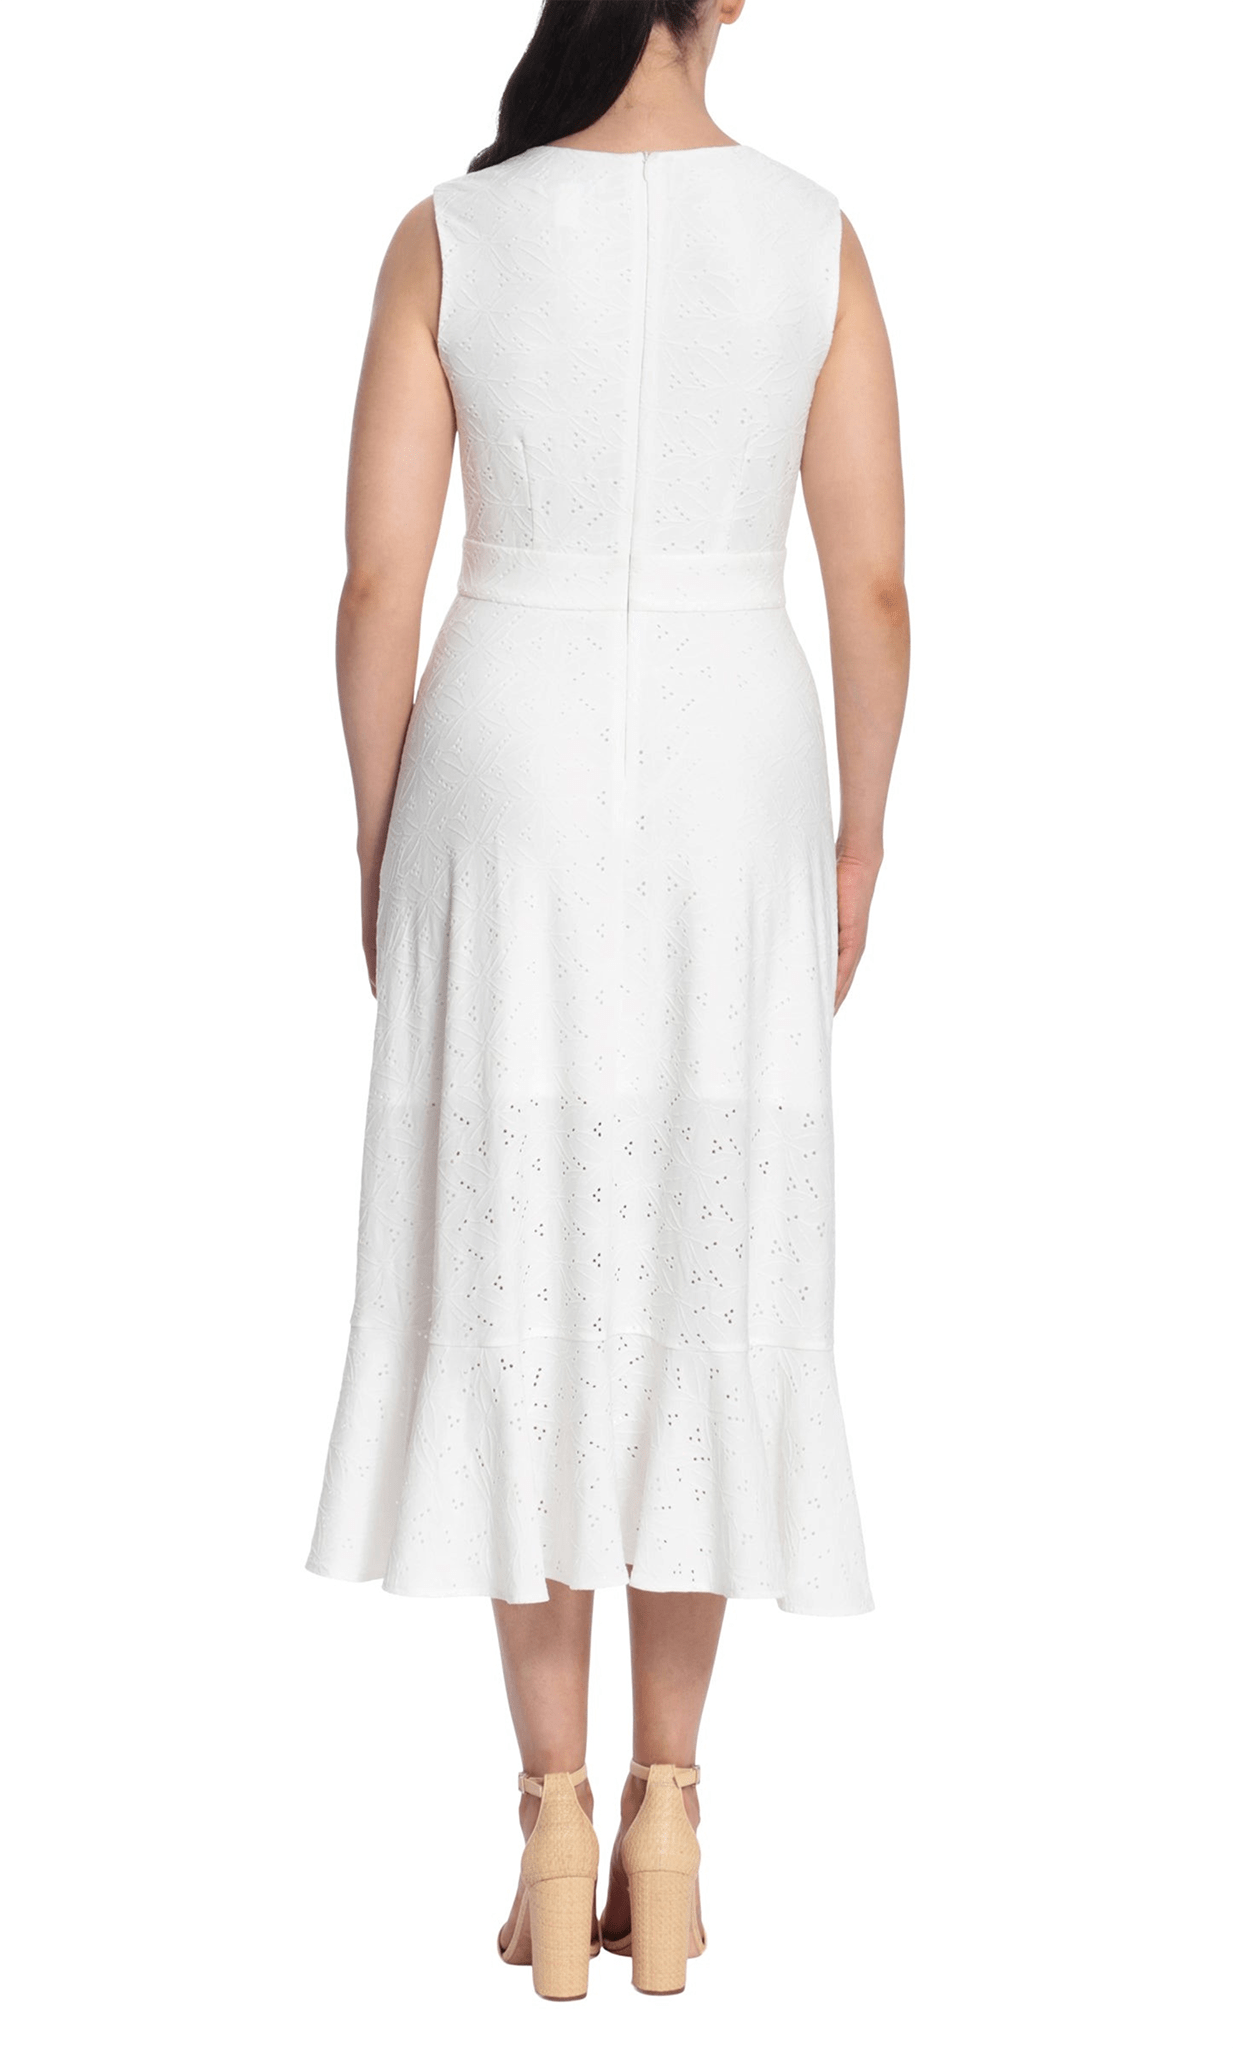 Maggy London T6240M - Sleeveless Eyelet Jersey Formal Dress Special Occasion Dress